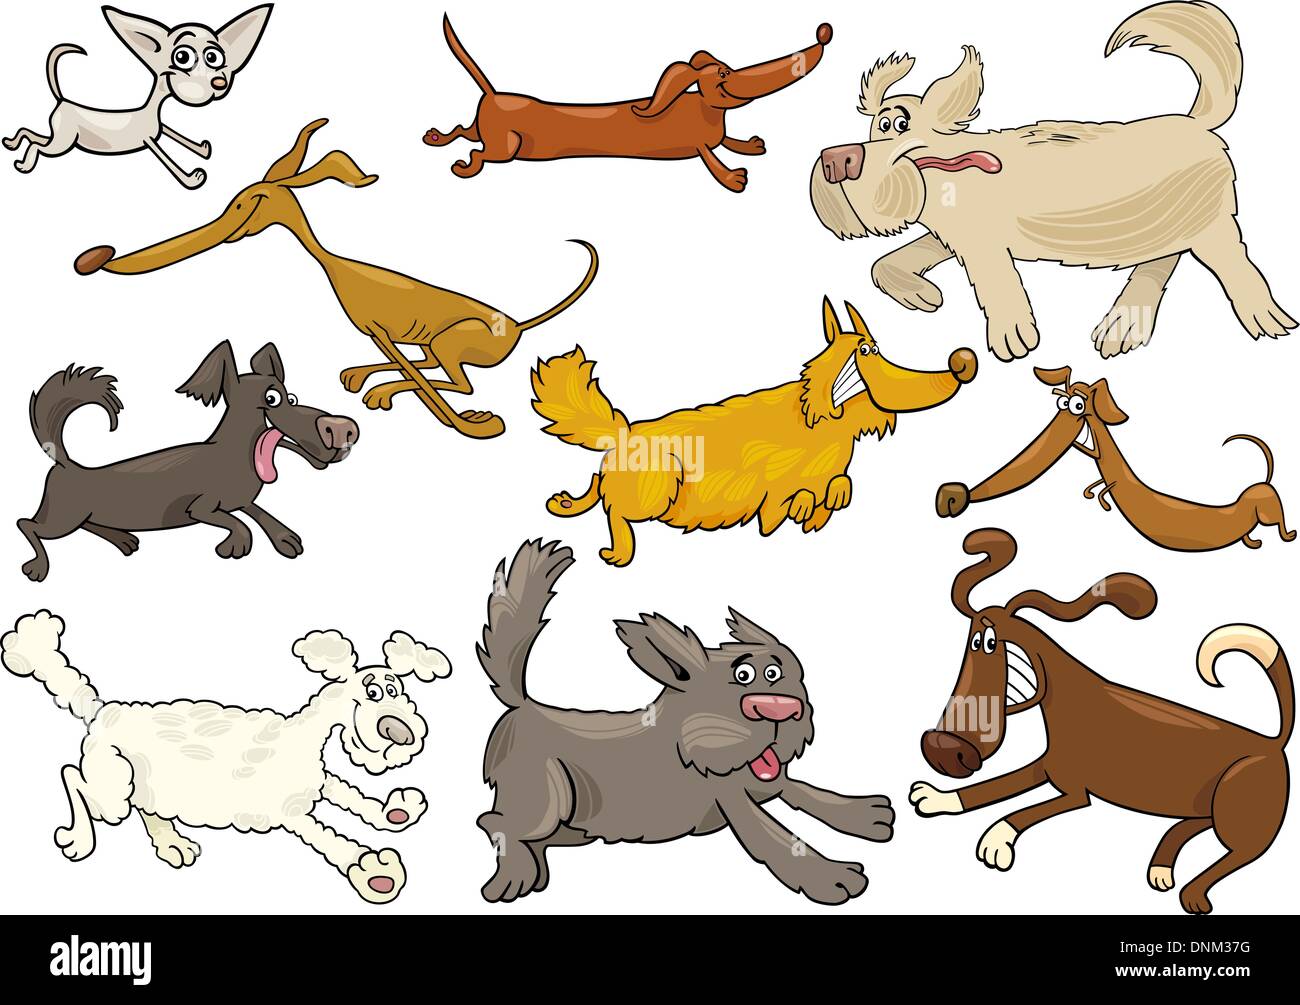 Cartoon Illustration of Different Playful Running Dogs or Puppies Set Stock Vector